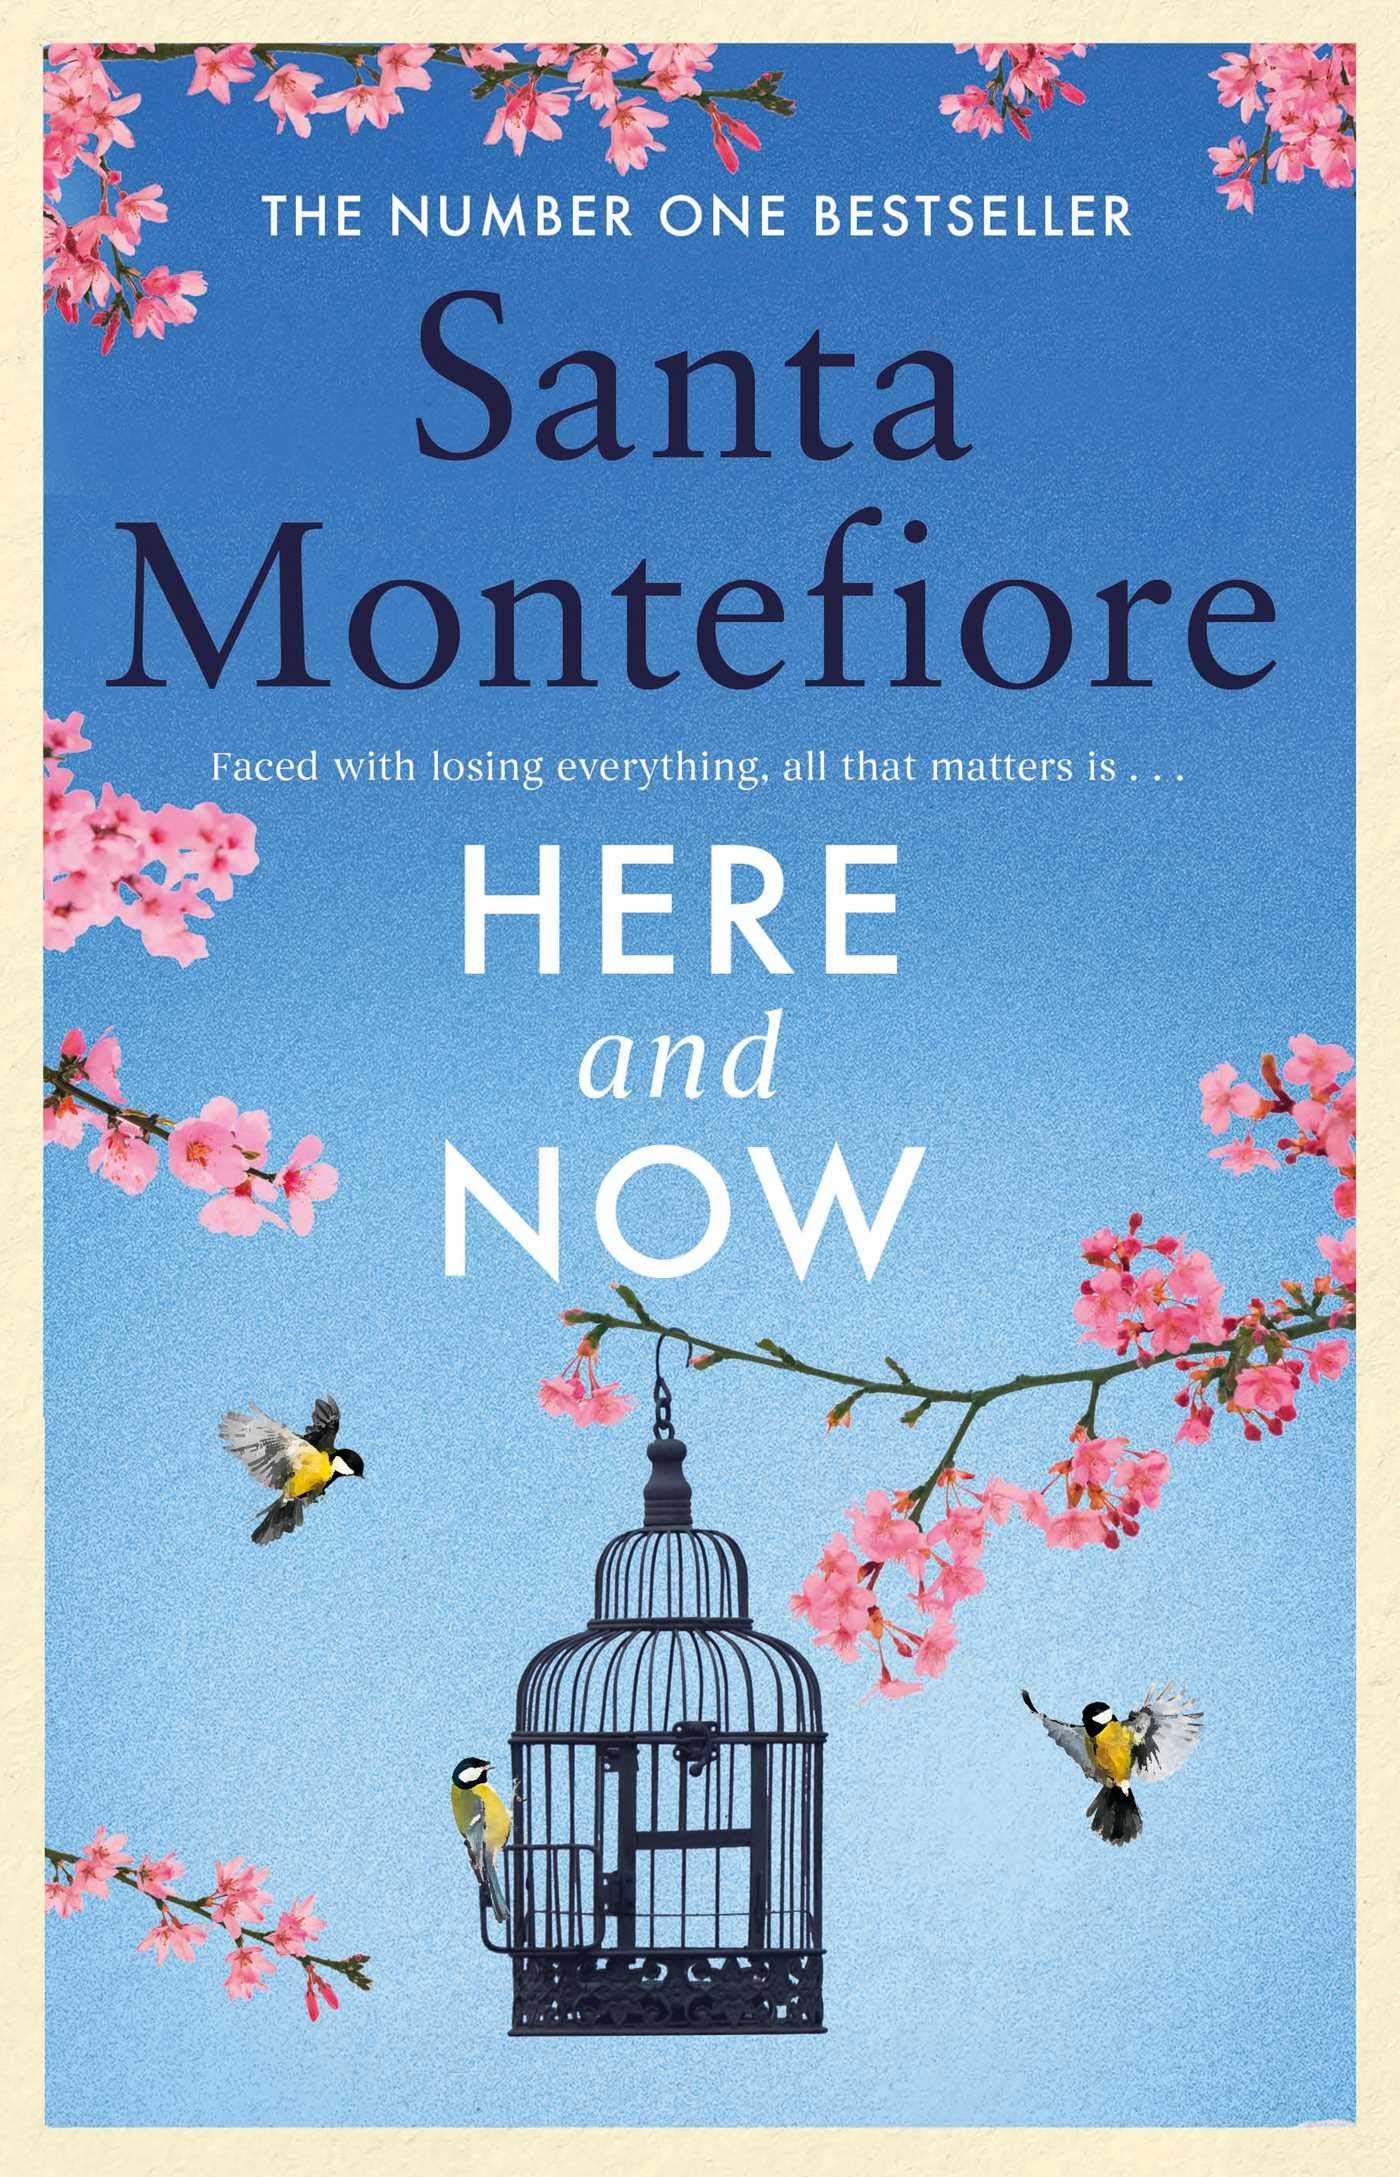 Here and Now by Santa Montefiore